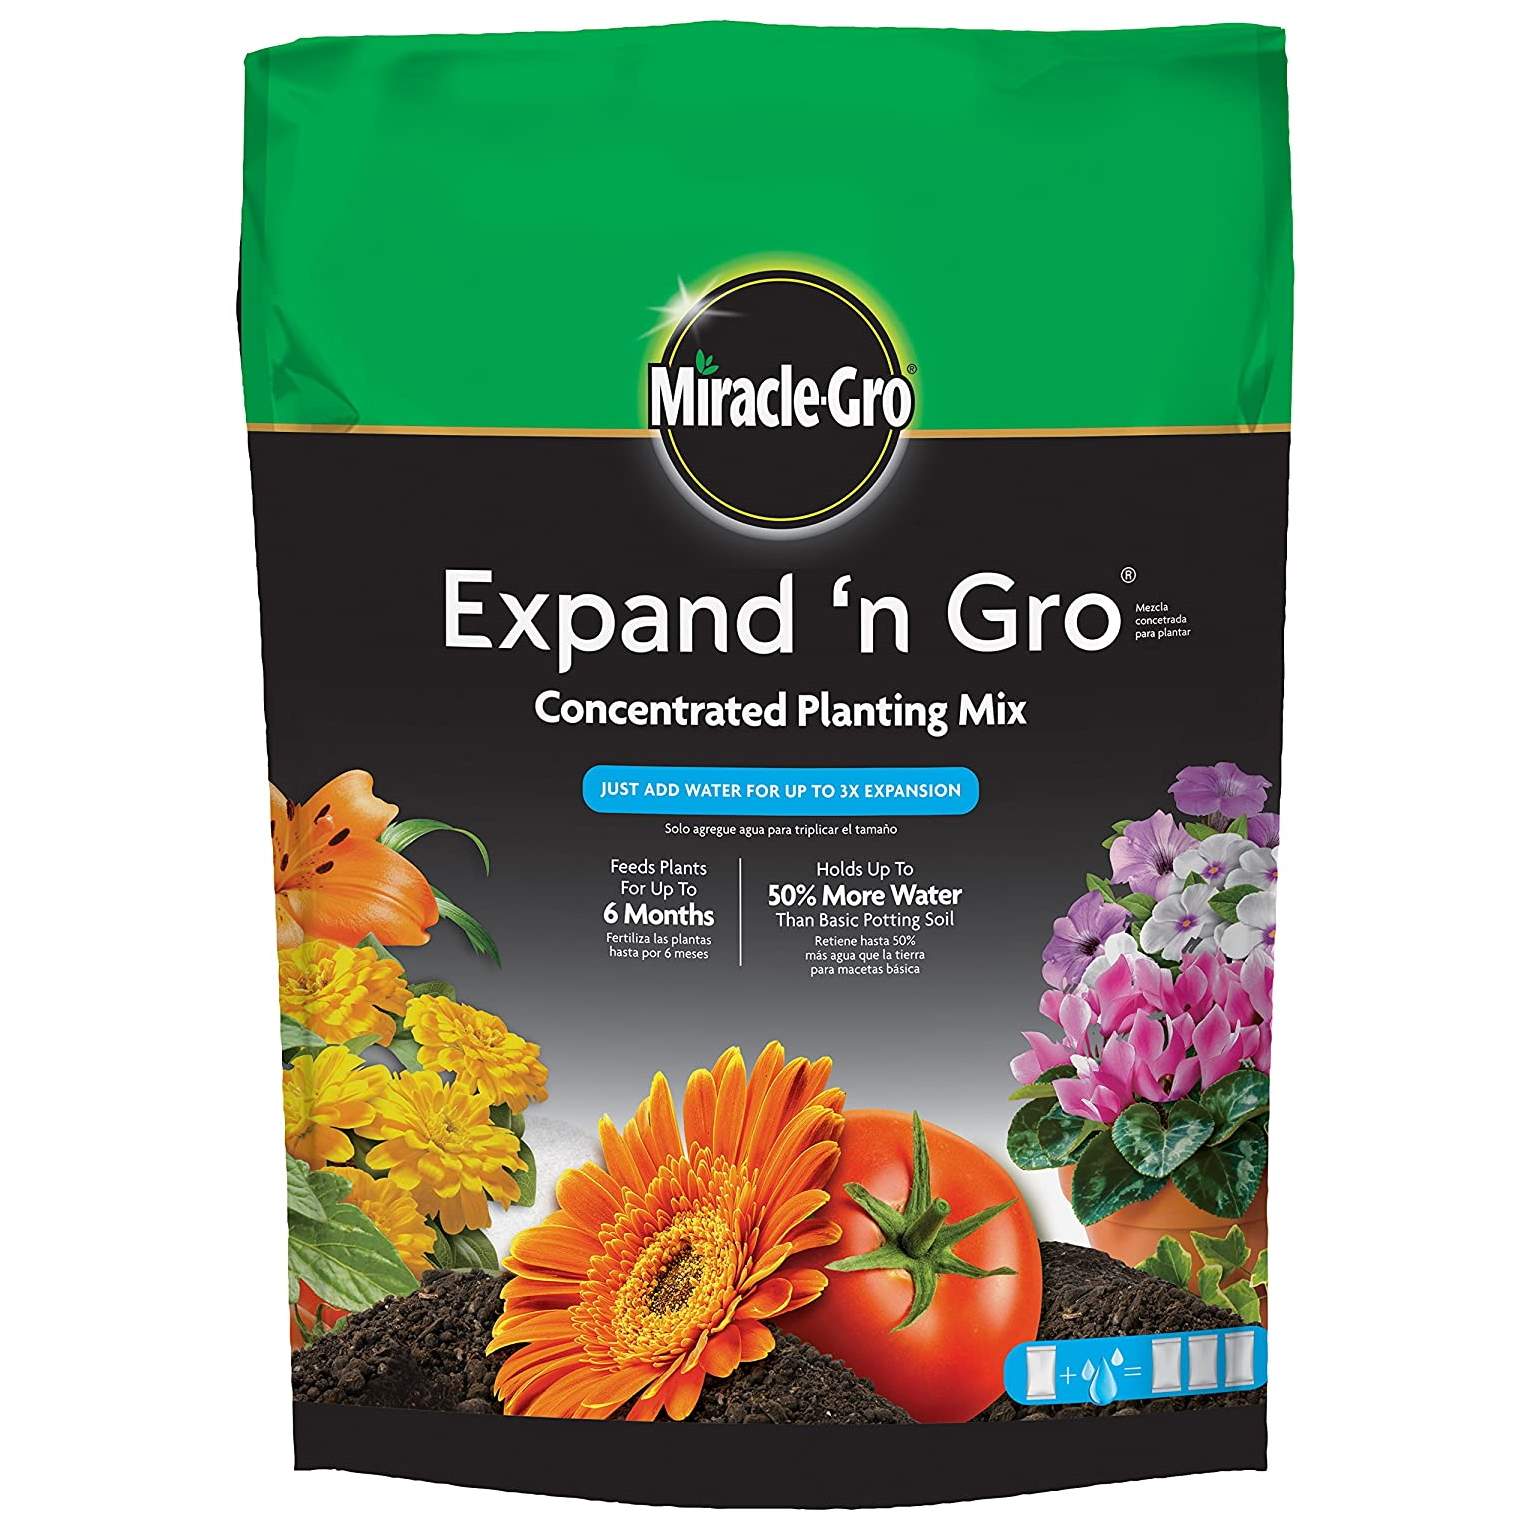 Miracle-Gro Expand 'n Gro Concentrated Planting Mix